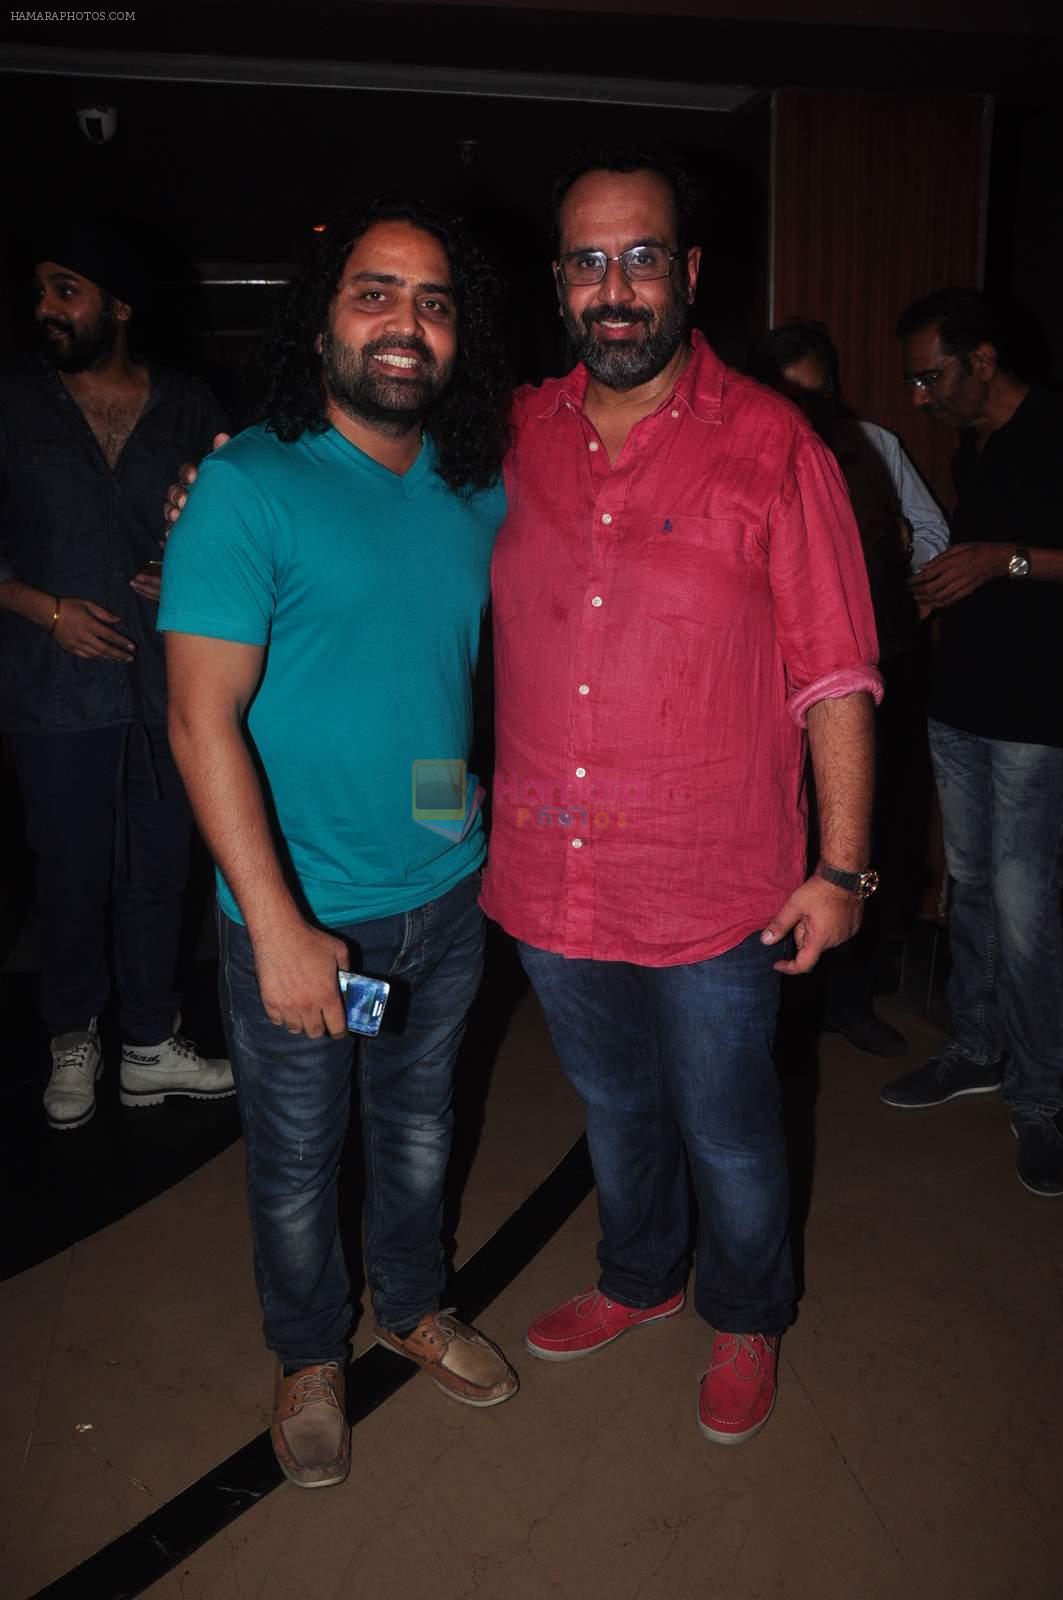 Anand L. Rai at Tanu Weds Manu 2 screening in PVR on 21st May 2015